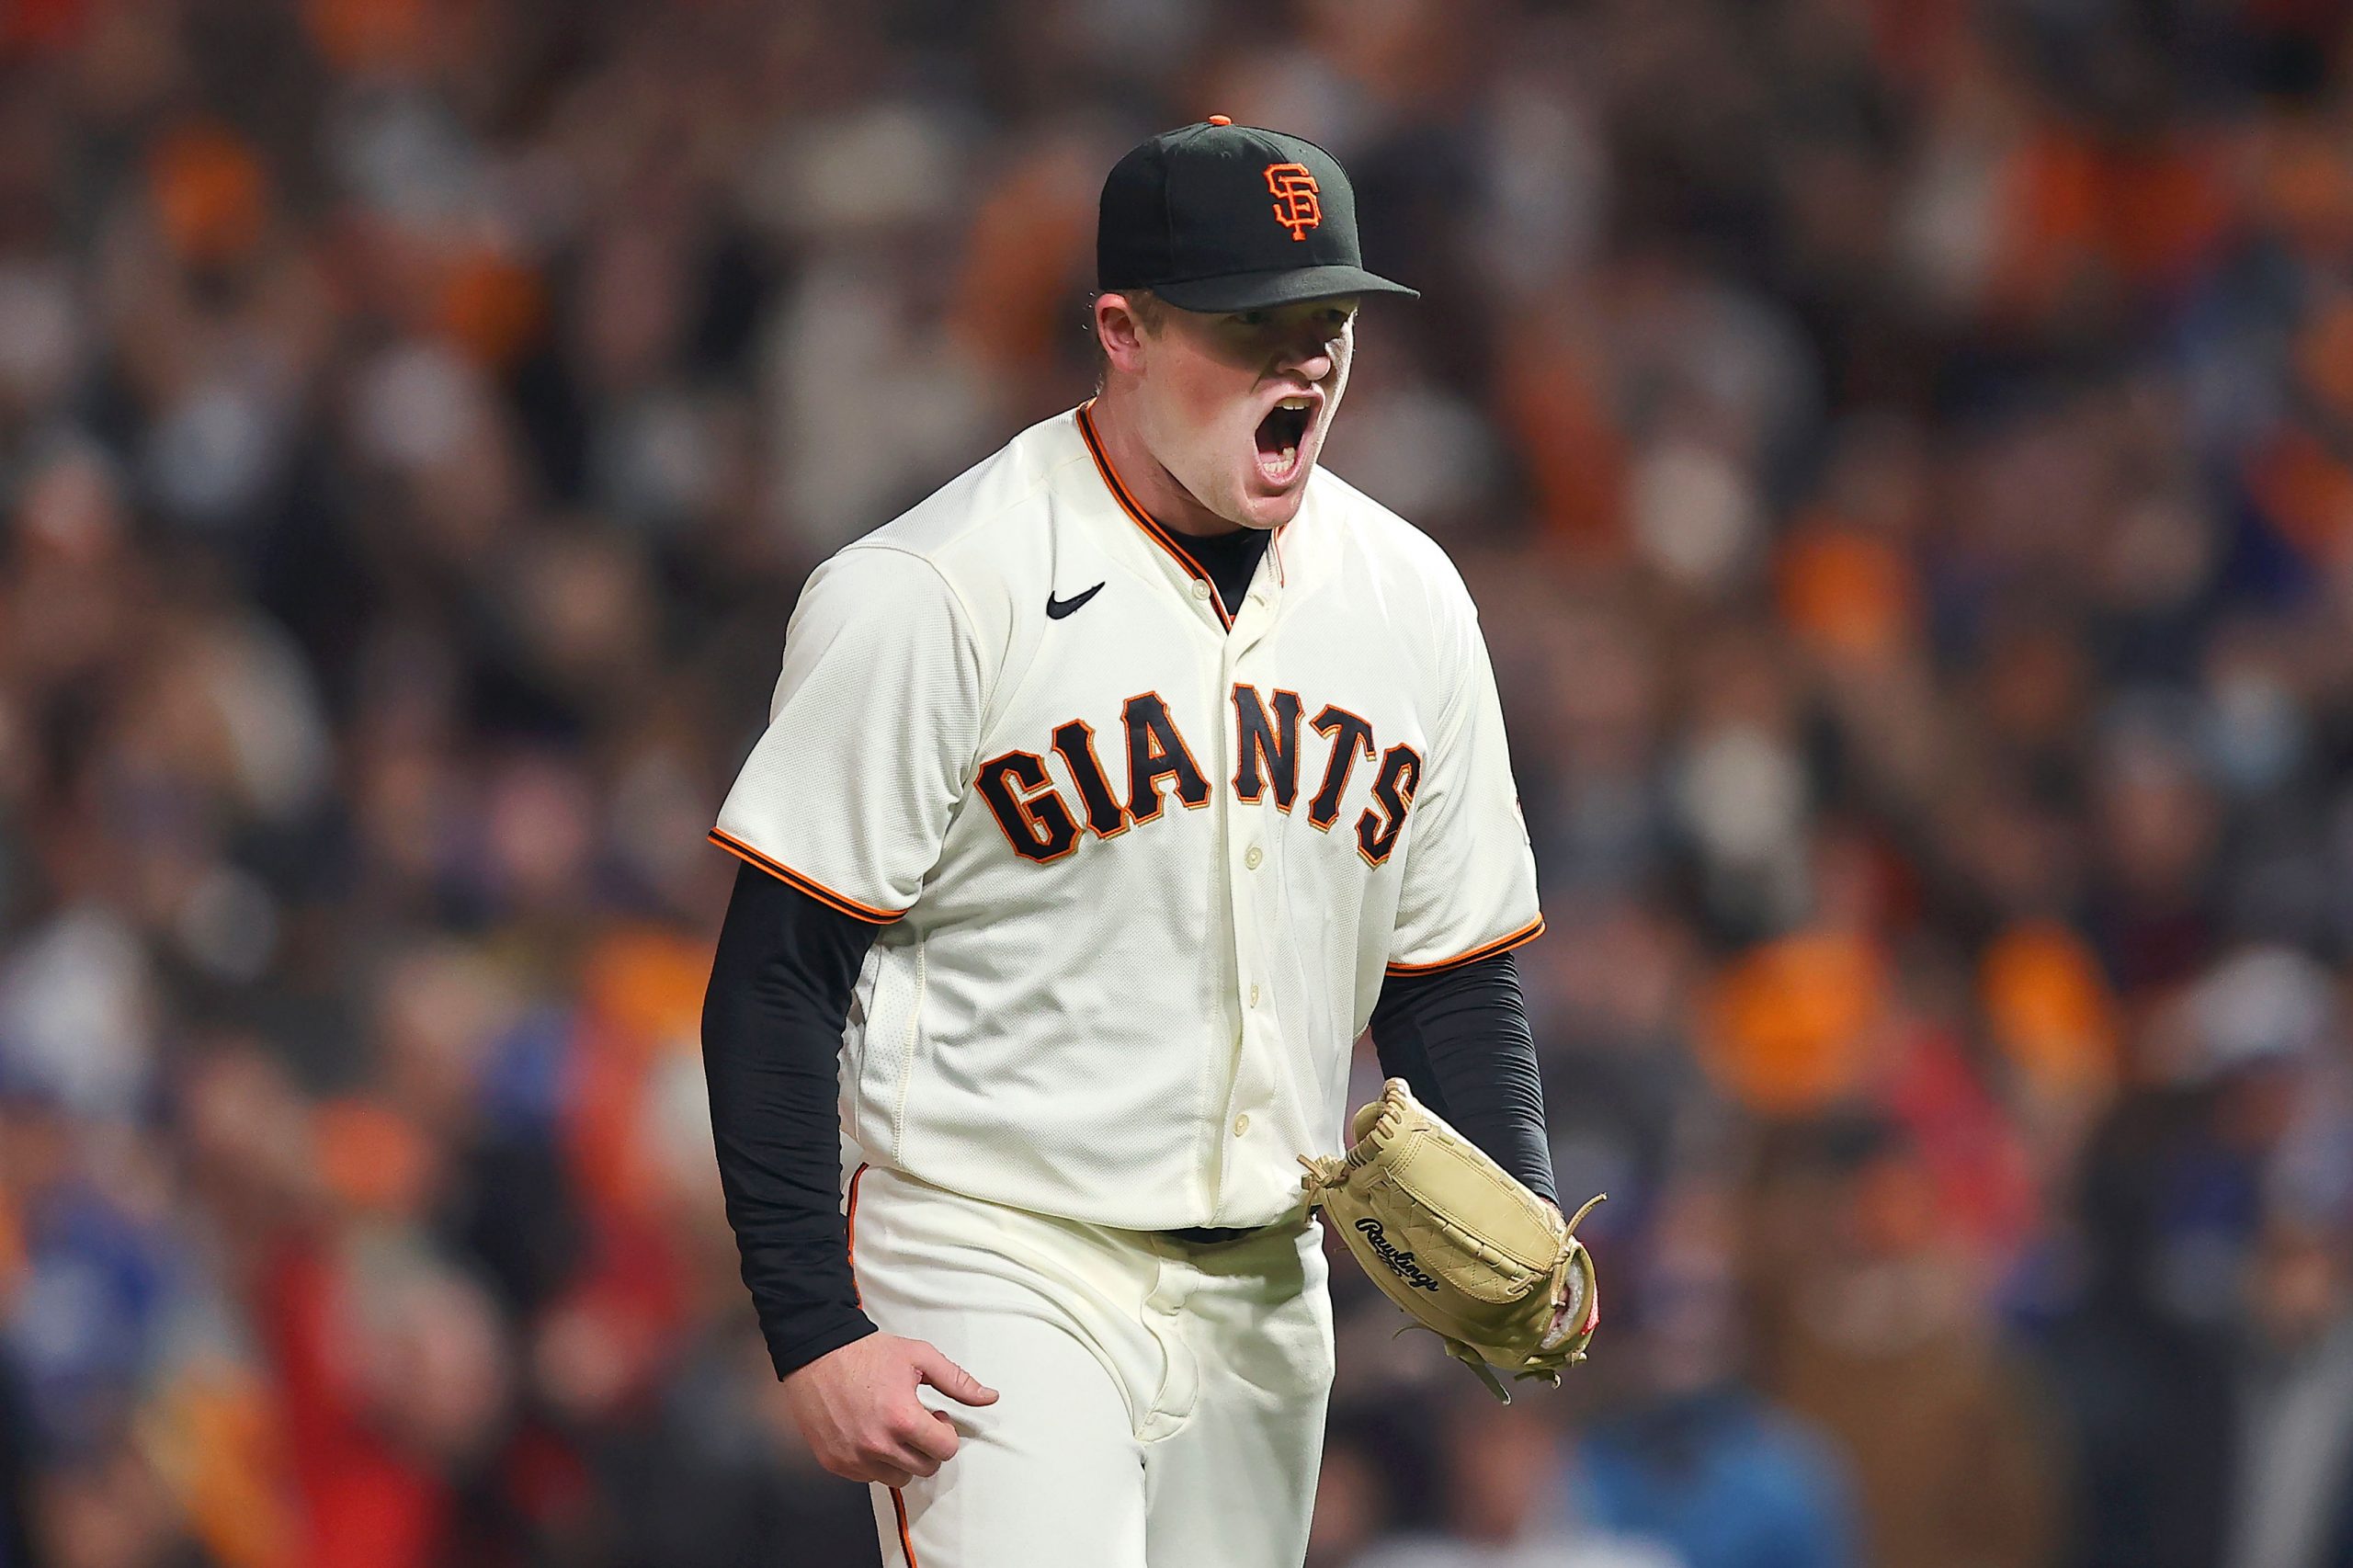 MLB: Masterful Webb pitches Giants past Dodgers in playoff opener